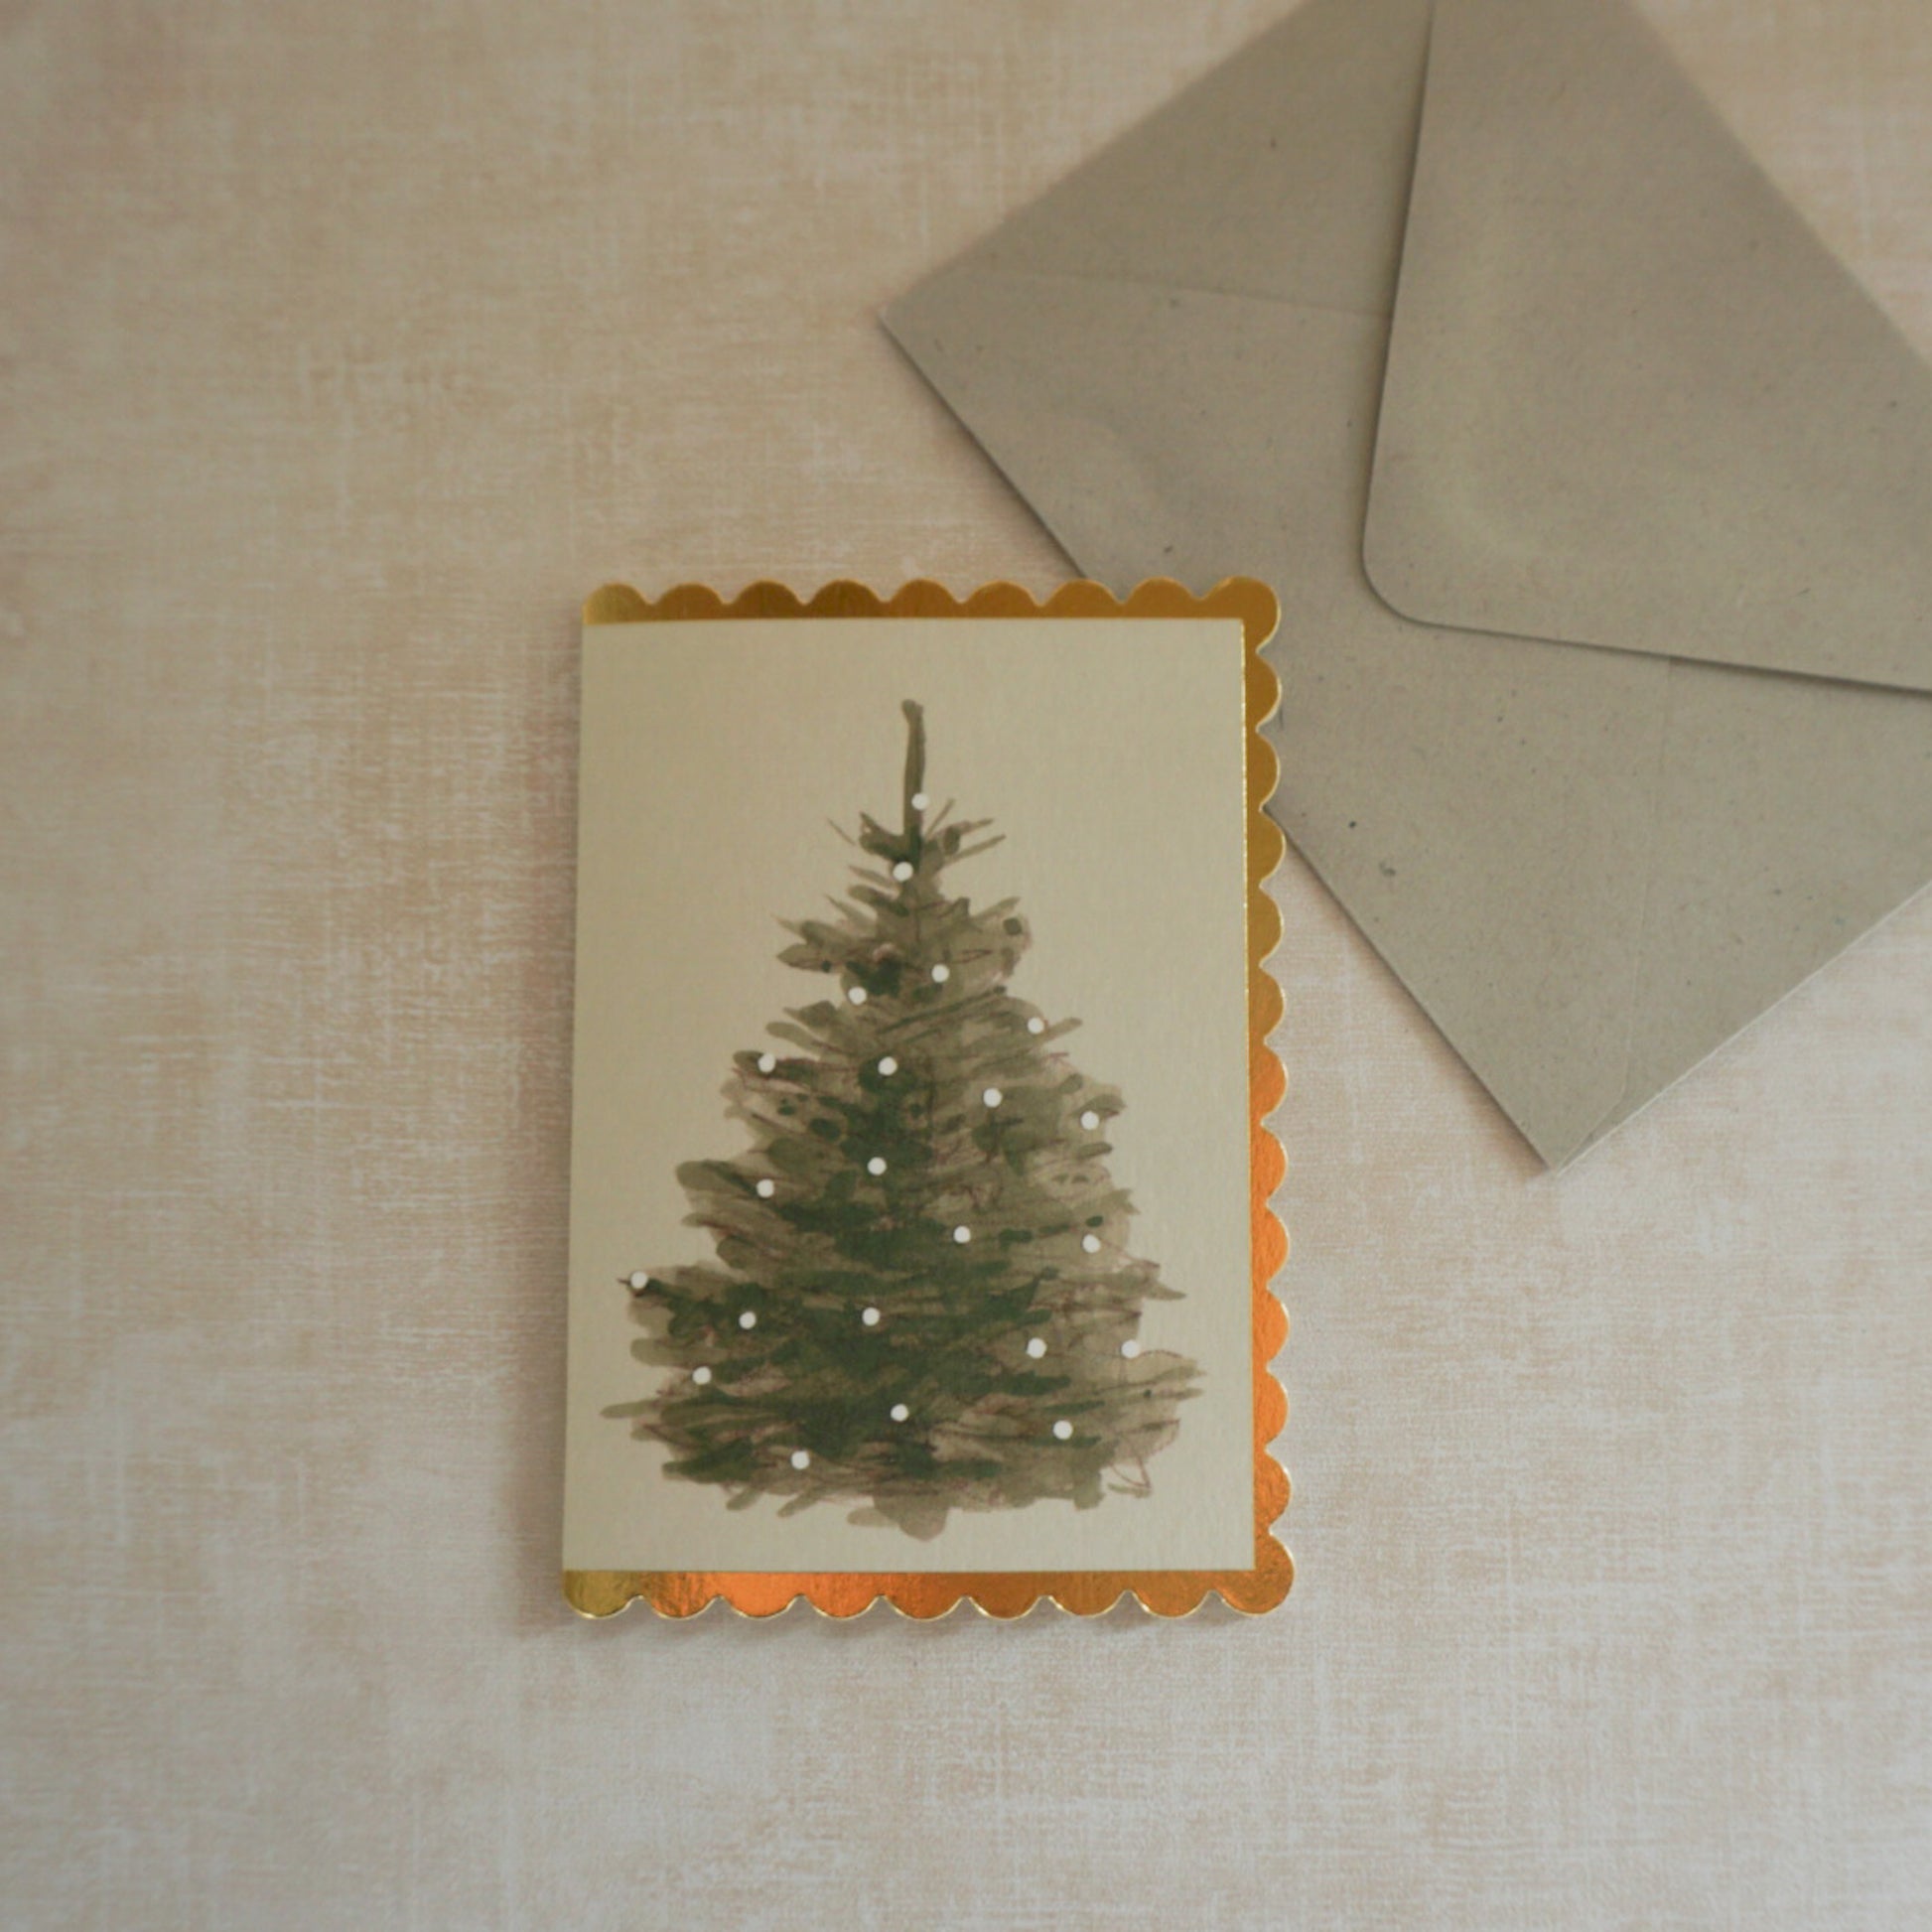 Christmas tree design high-quality gold foil detail greeting card for Christmas